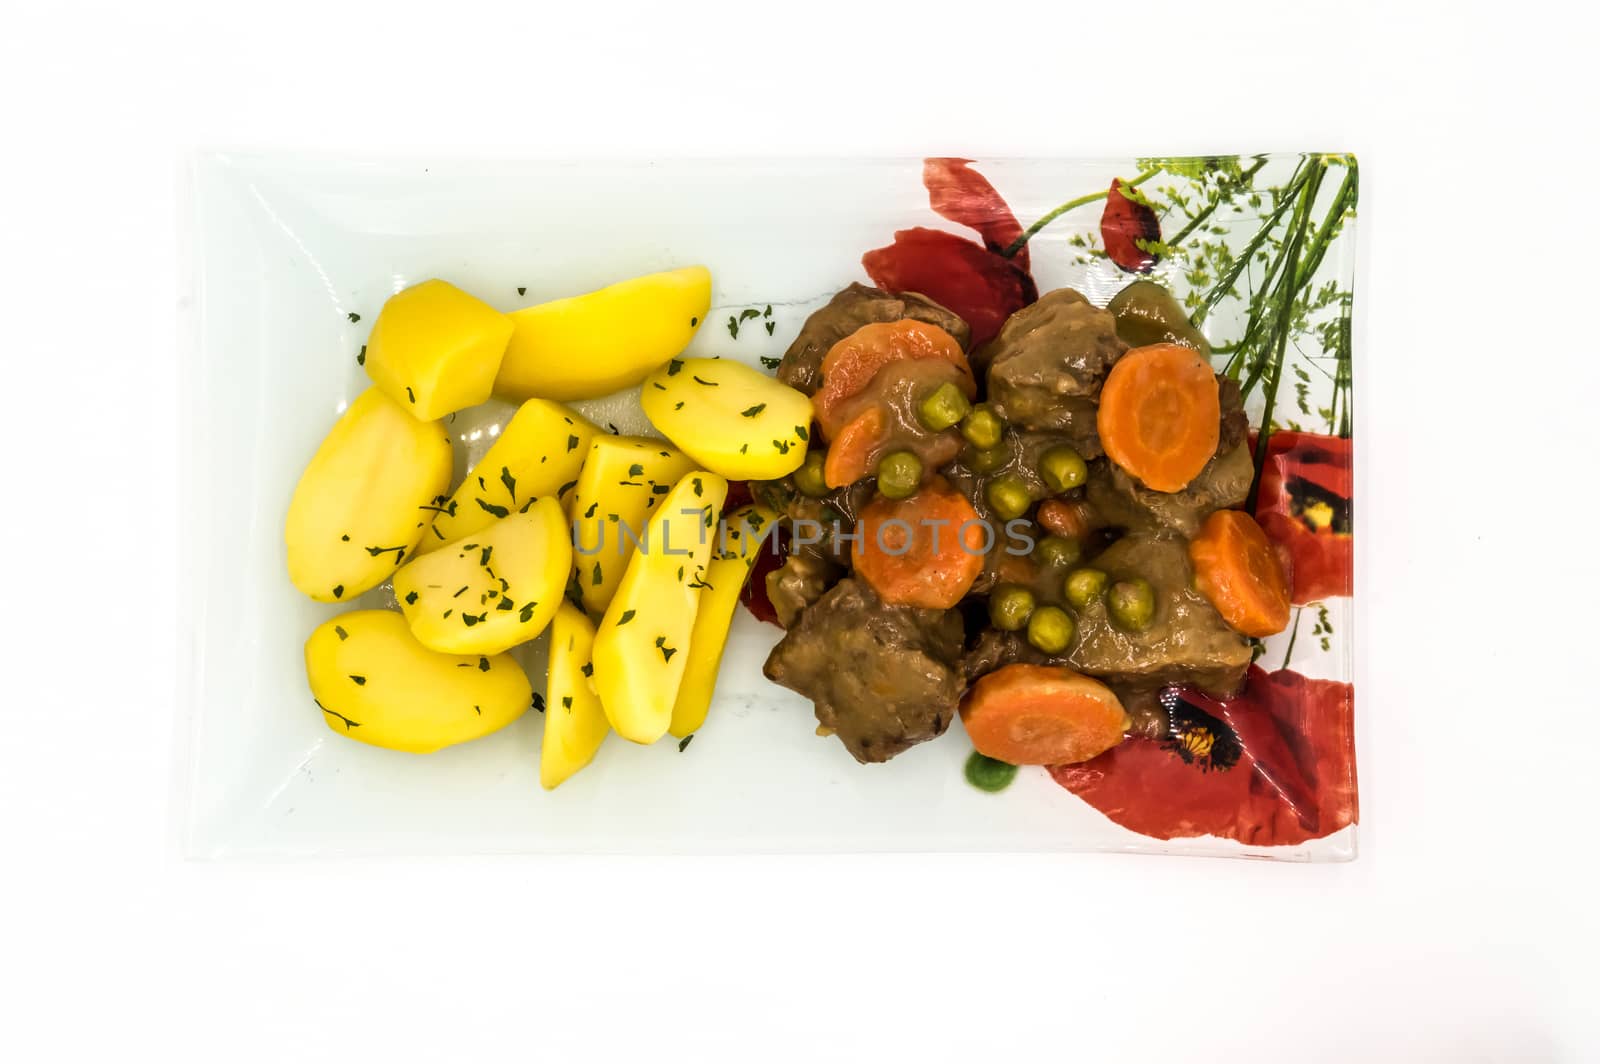 Belgian beef stew in beer with carrots and peas served on a glass plate with flowers